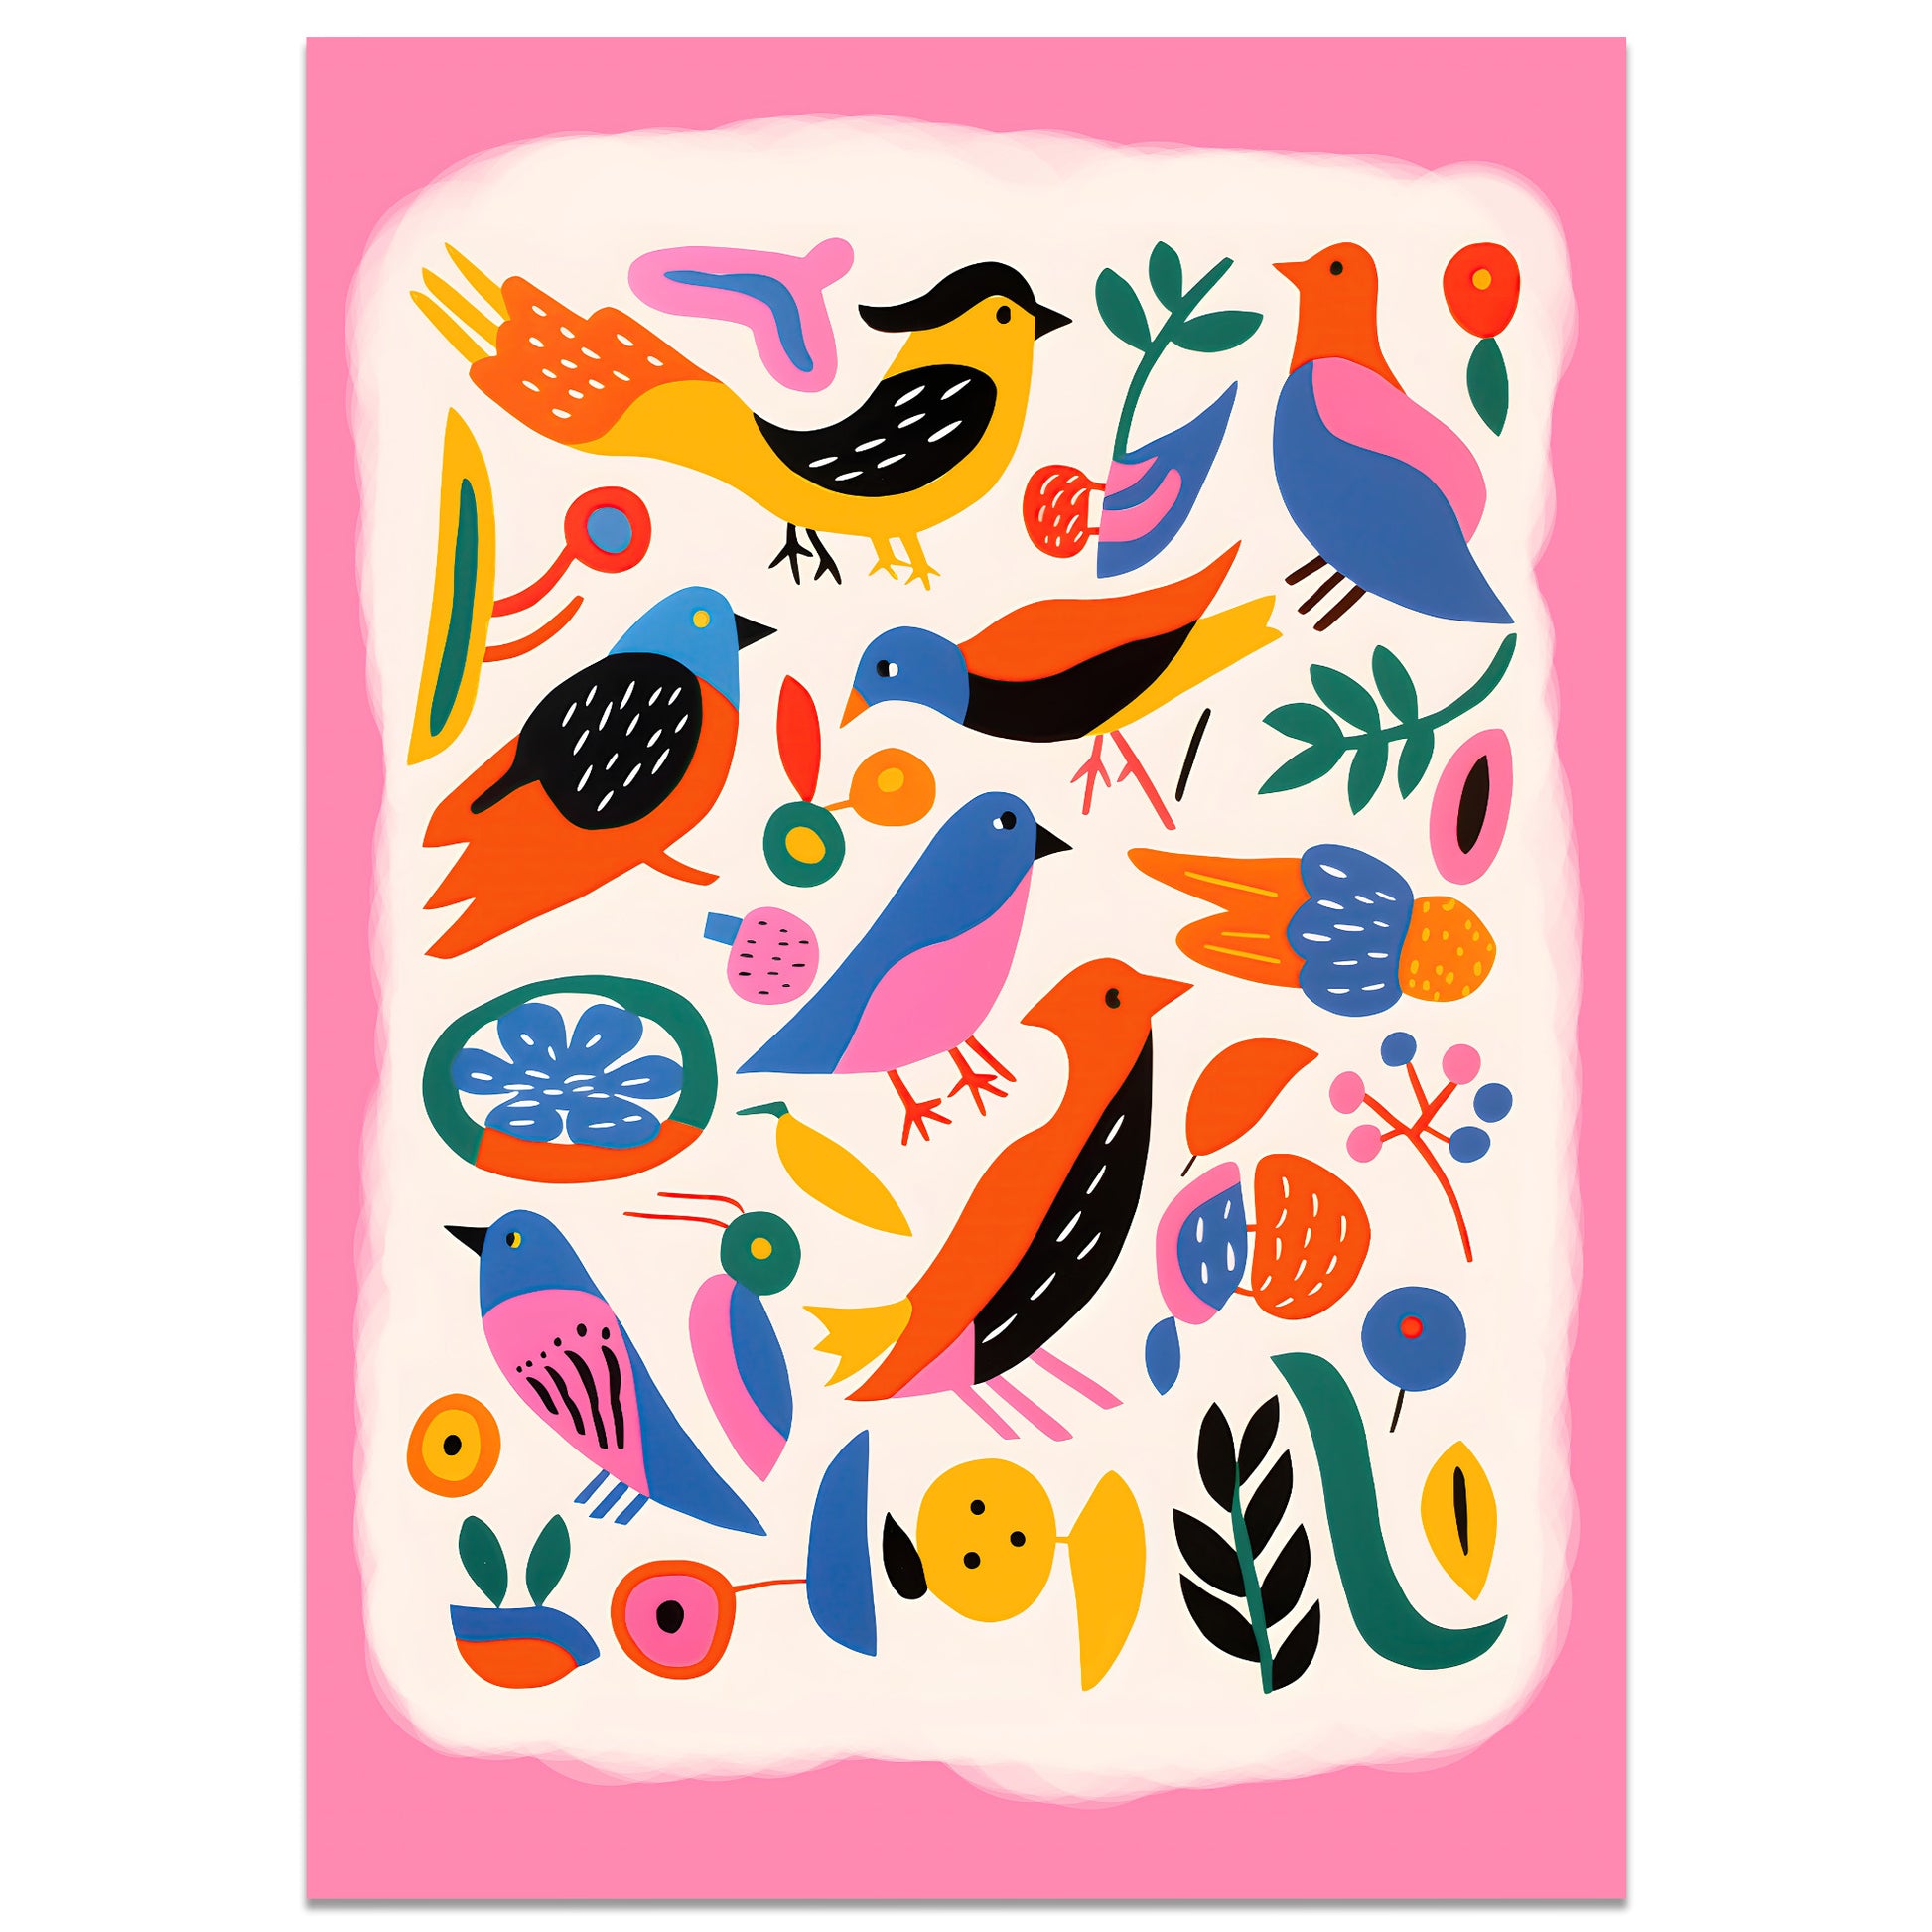 Colorful birds and flora art illustration